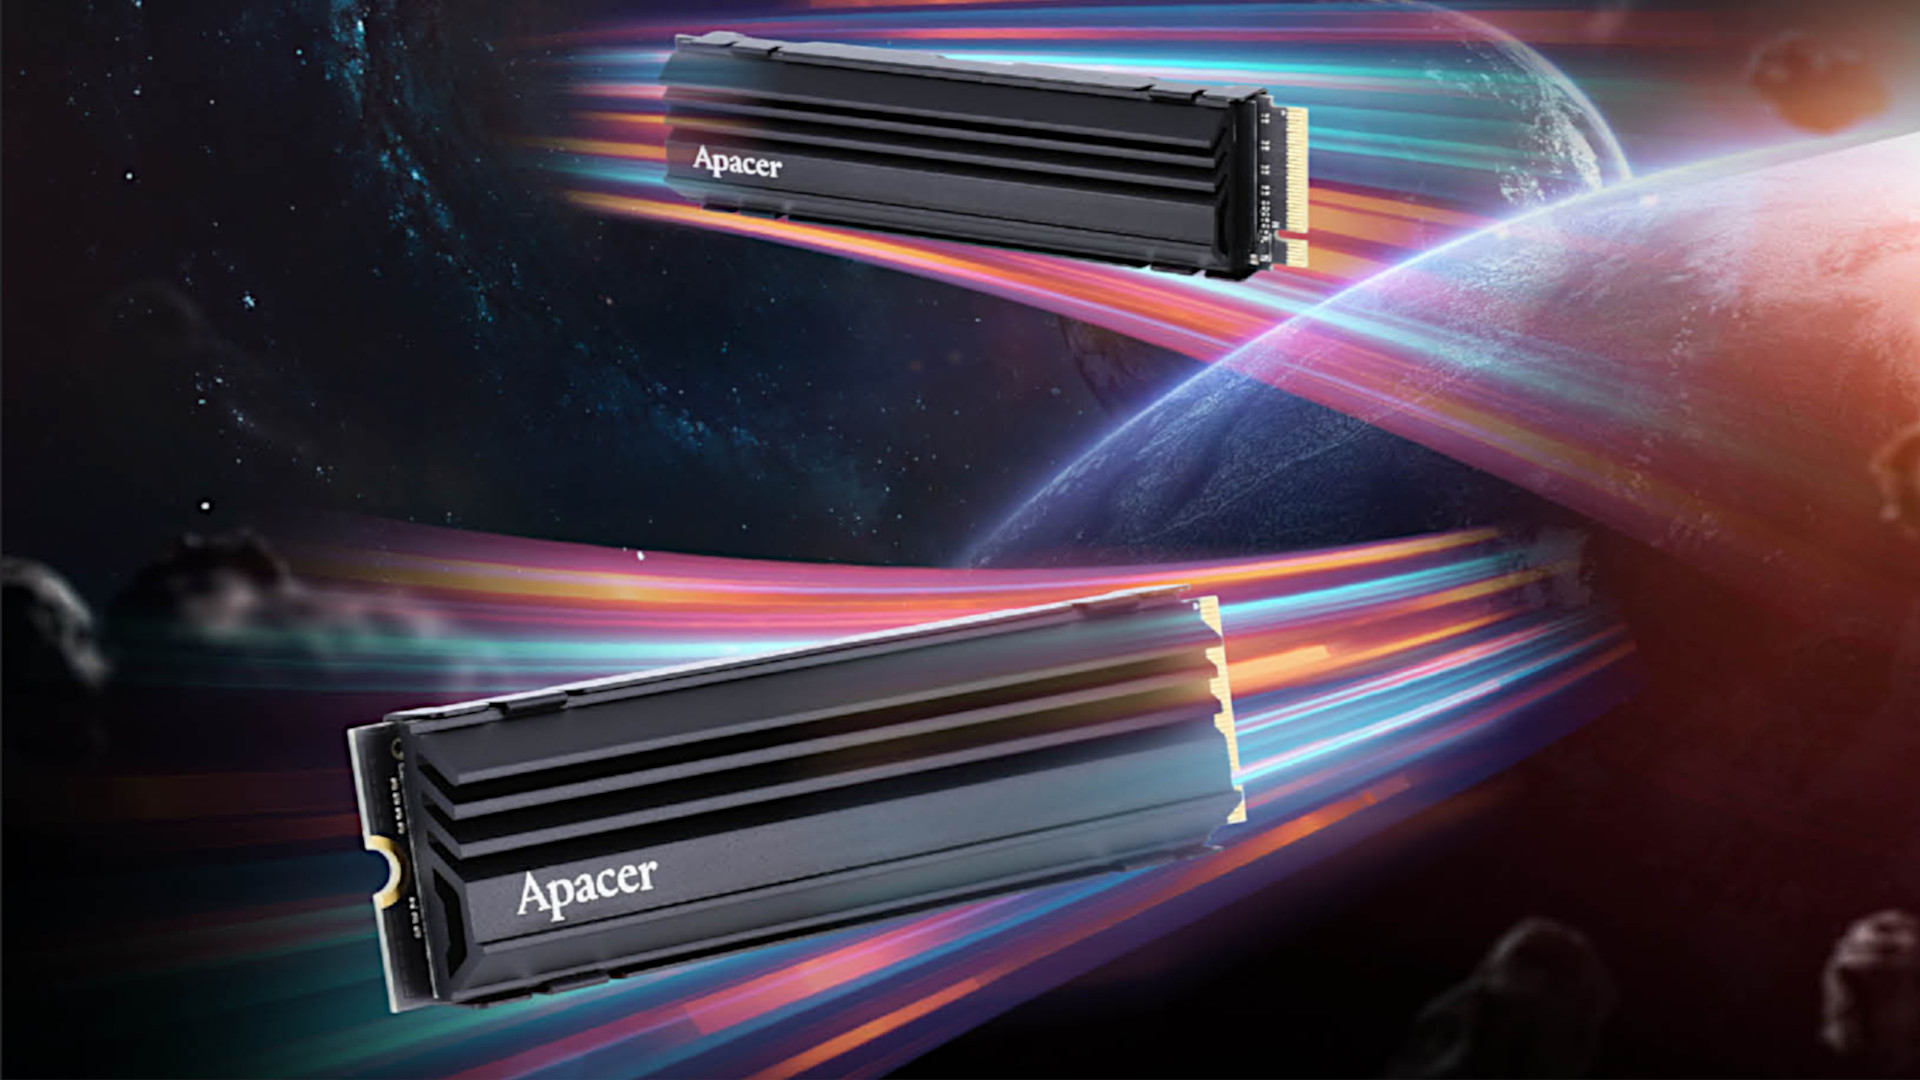 The era of PCIe 5.0 SSDs begins with Apacer and 13GB/s read speeds